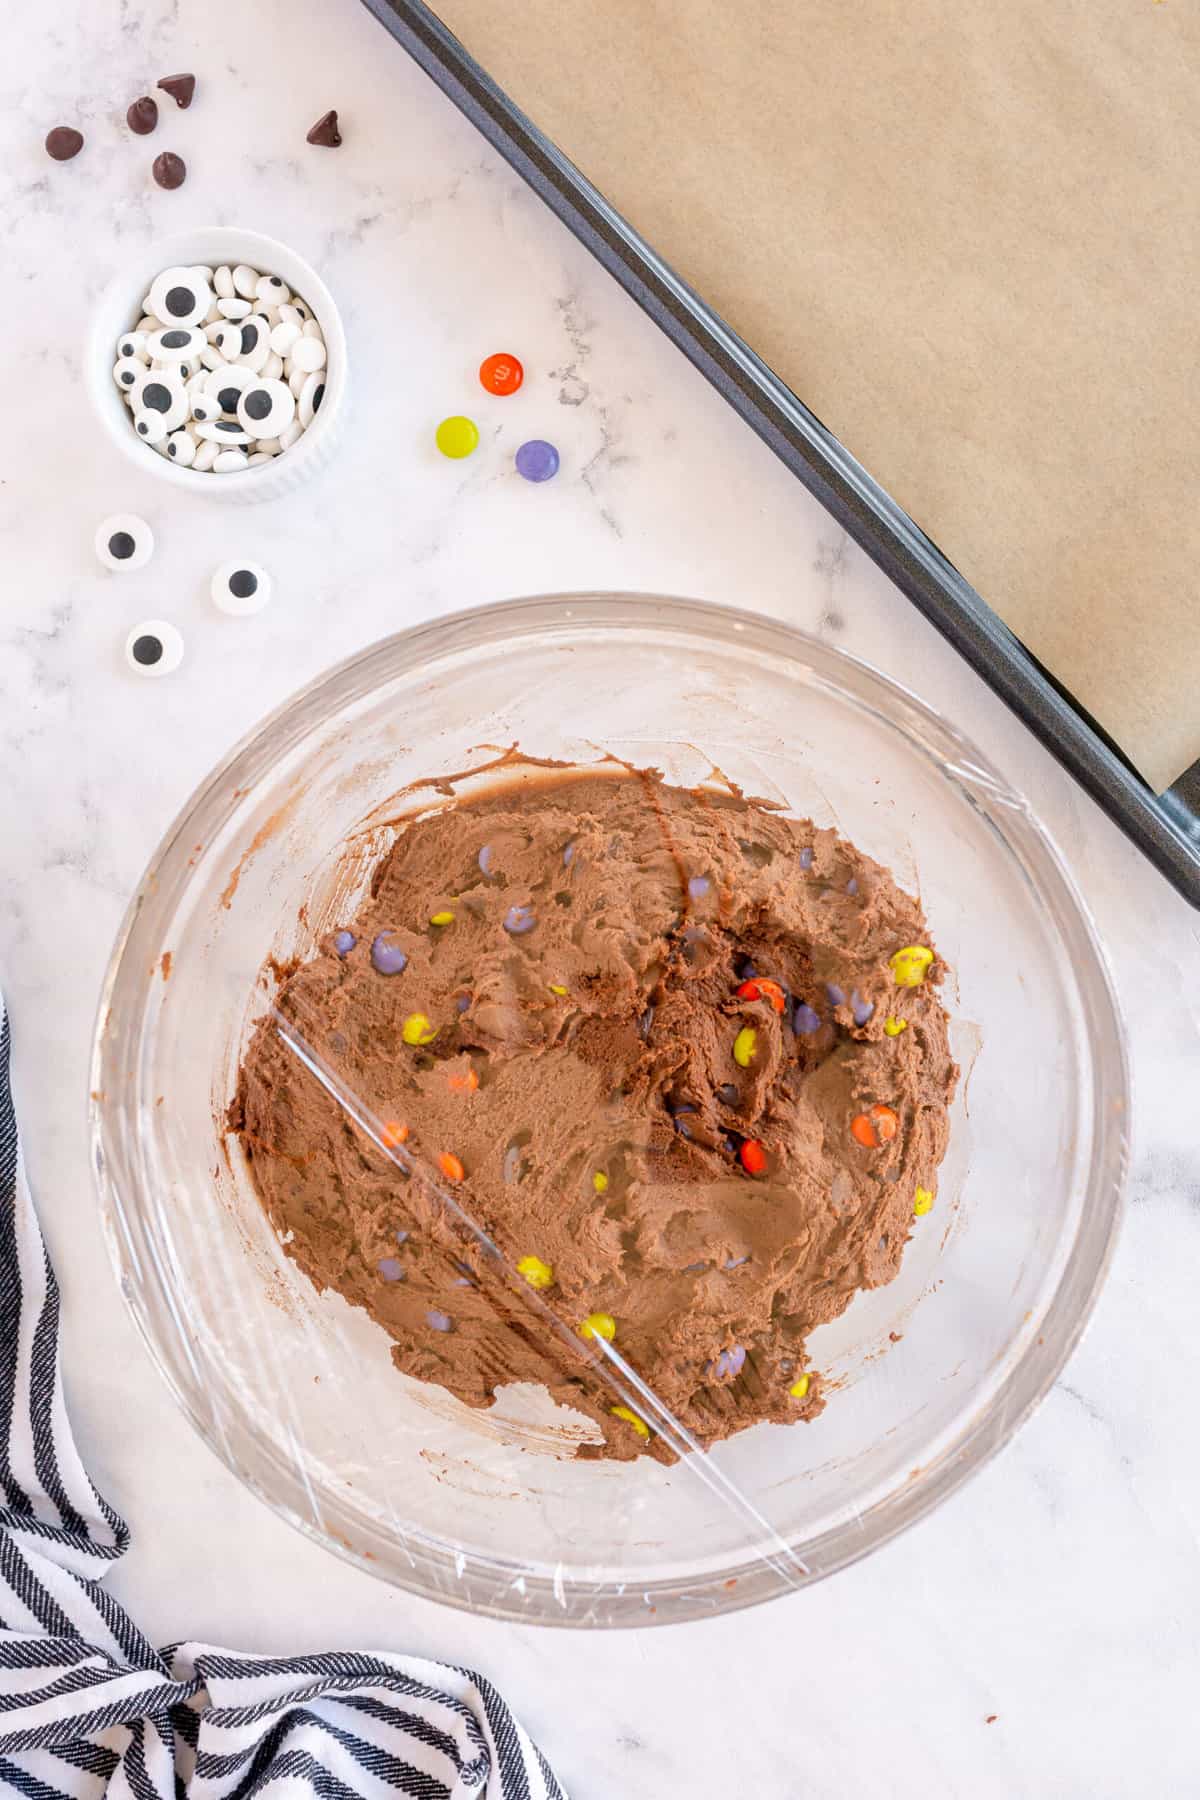 M&Ms and chocolate chips mixed together well. Put plastic wrap on top of bowl and refrigerate for 30 minutes.